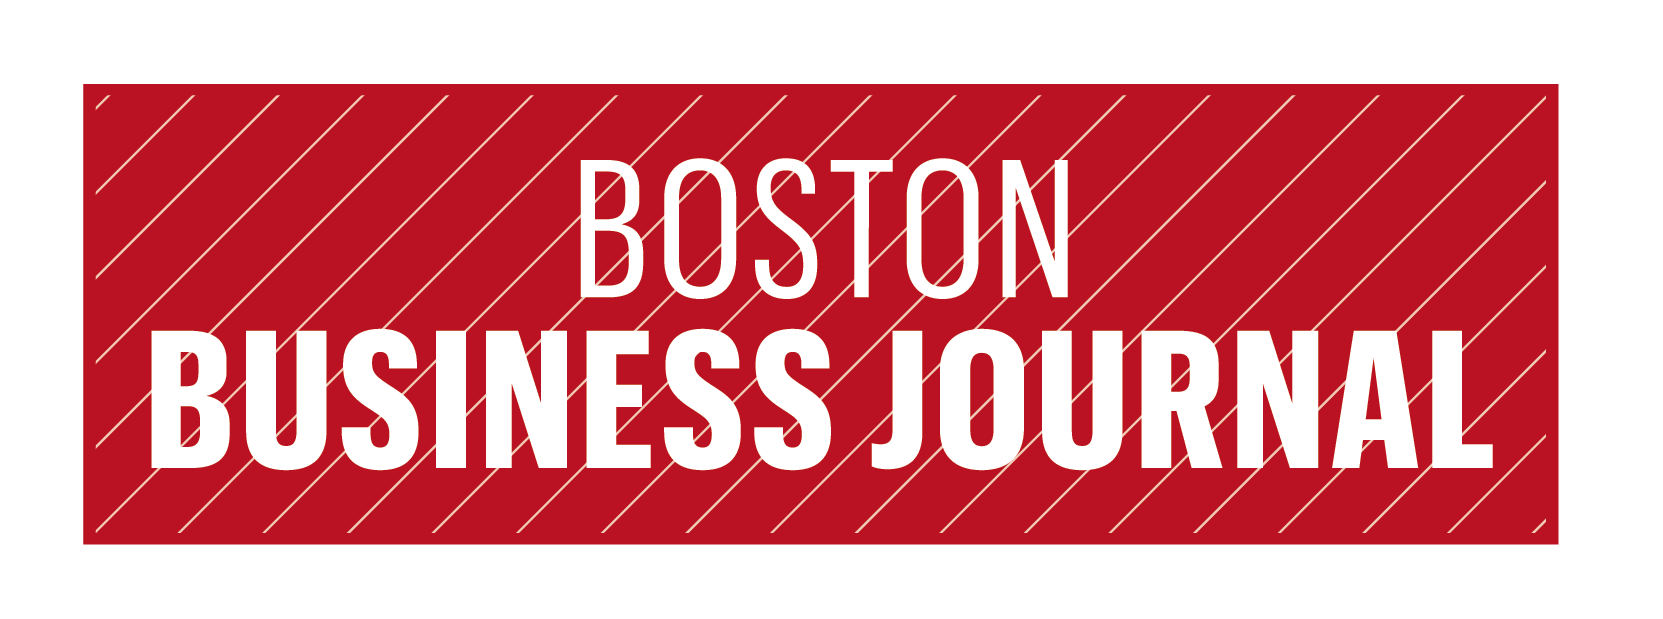 Boston Business Journel white text in red box